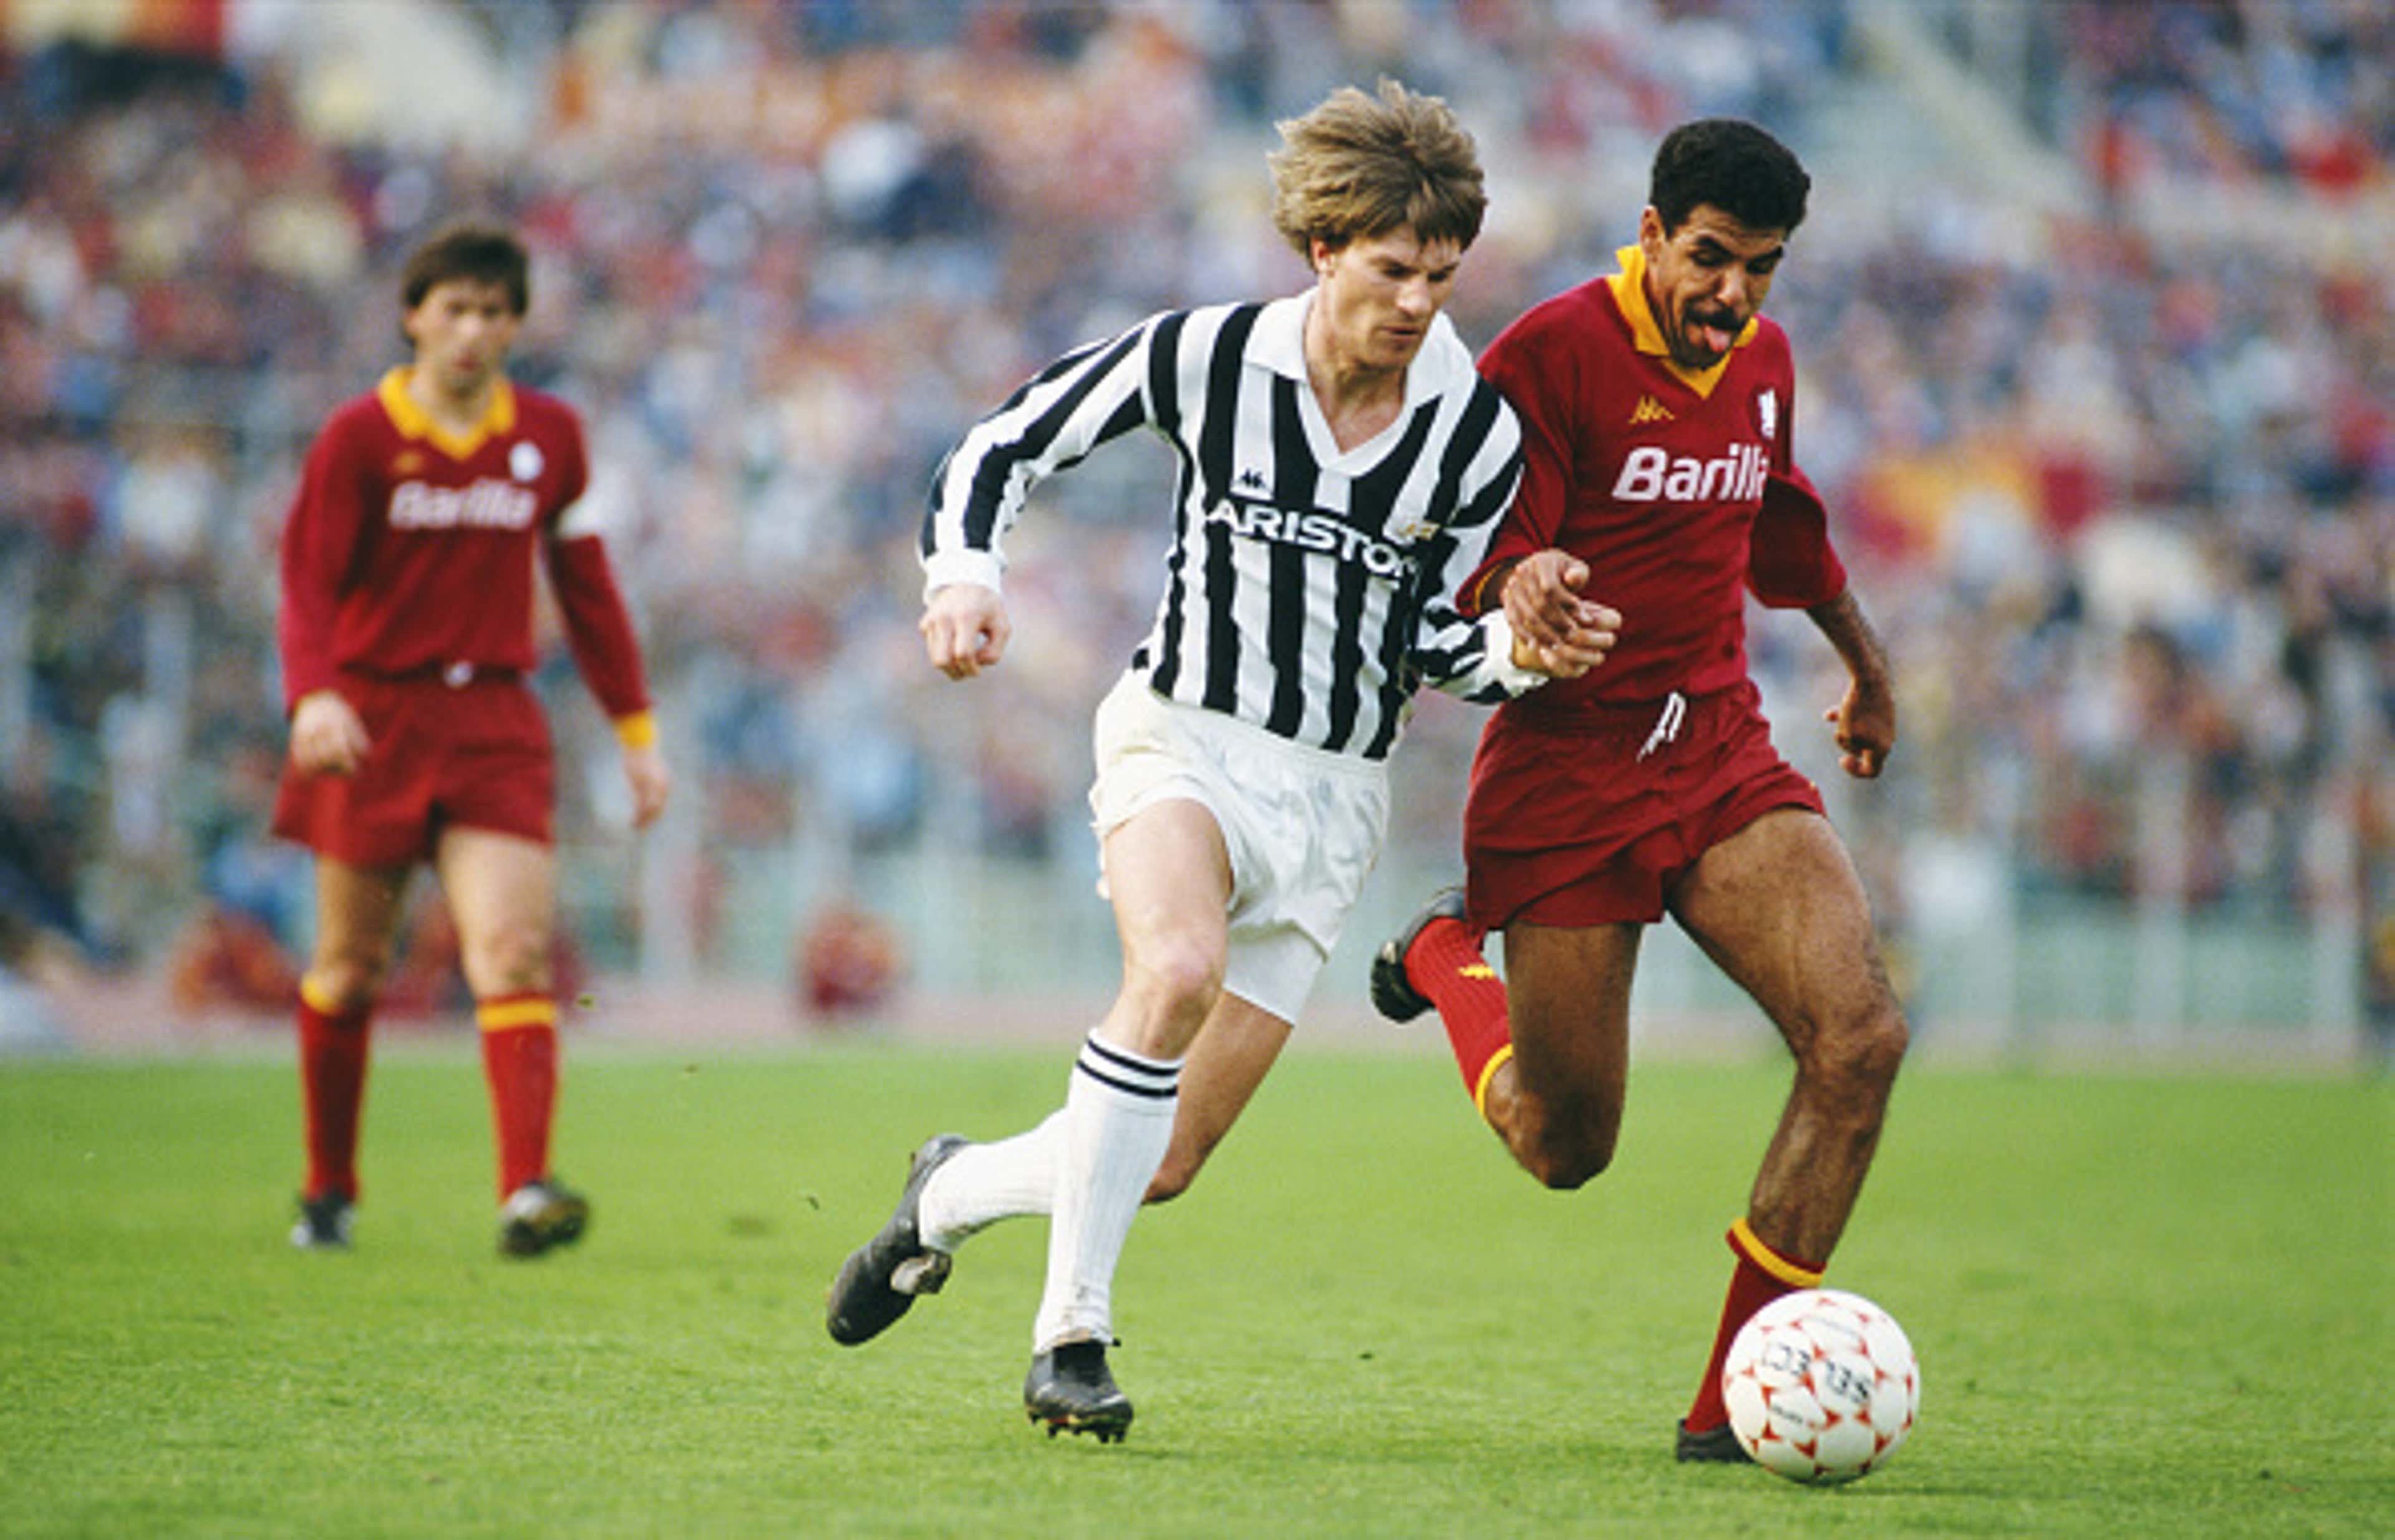 Michael Laudrup (l) tussles with AS Roma defender Toninho Cerezo